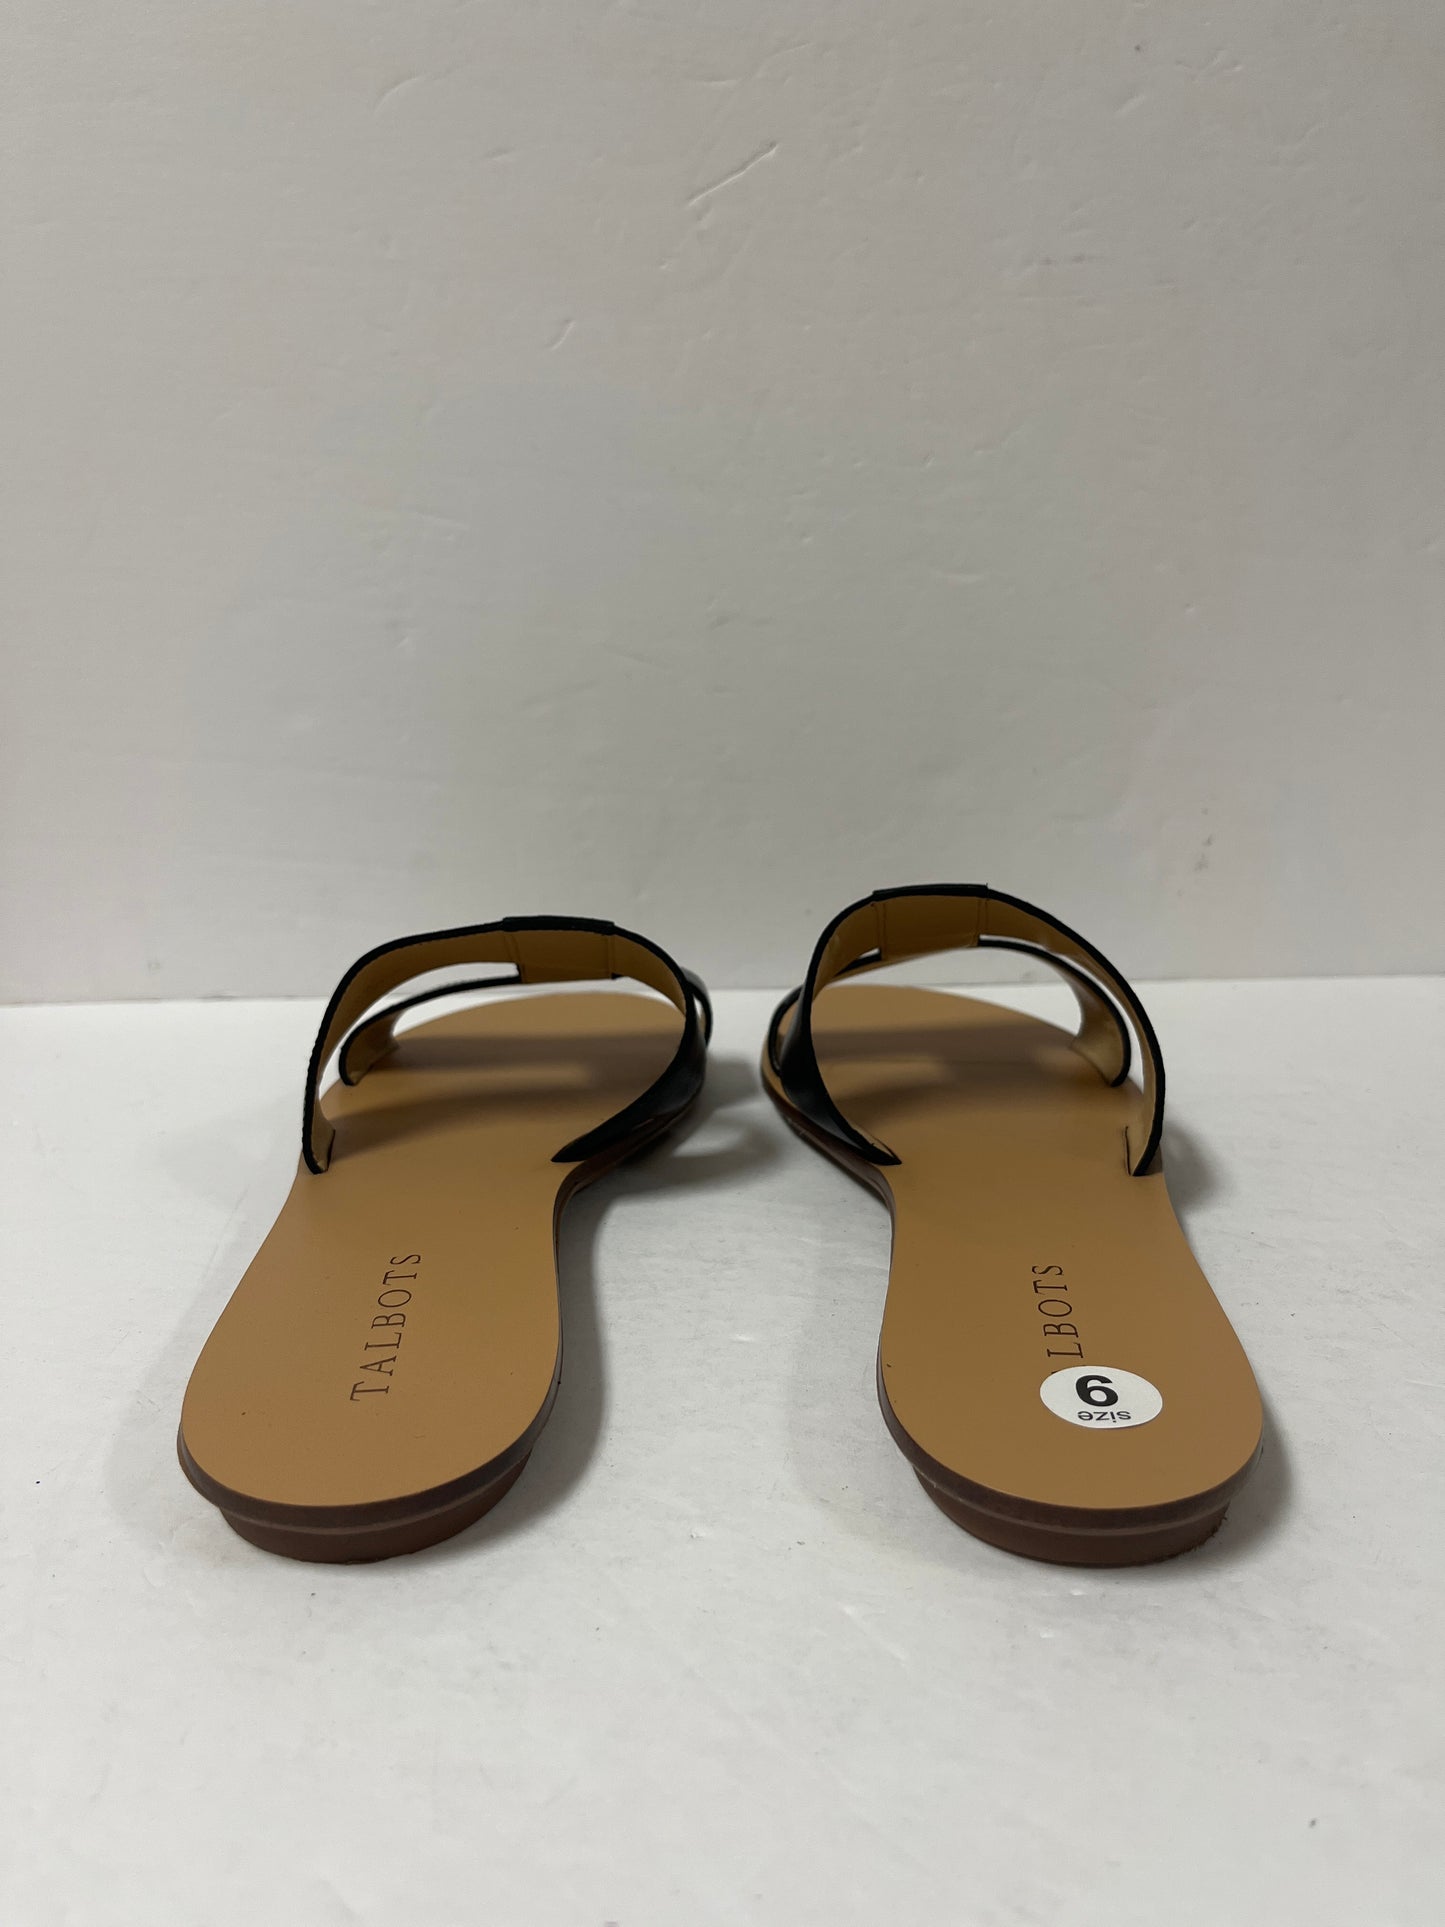 Sandals Flats By Talbots  Size: 9